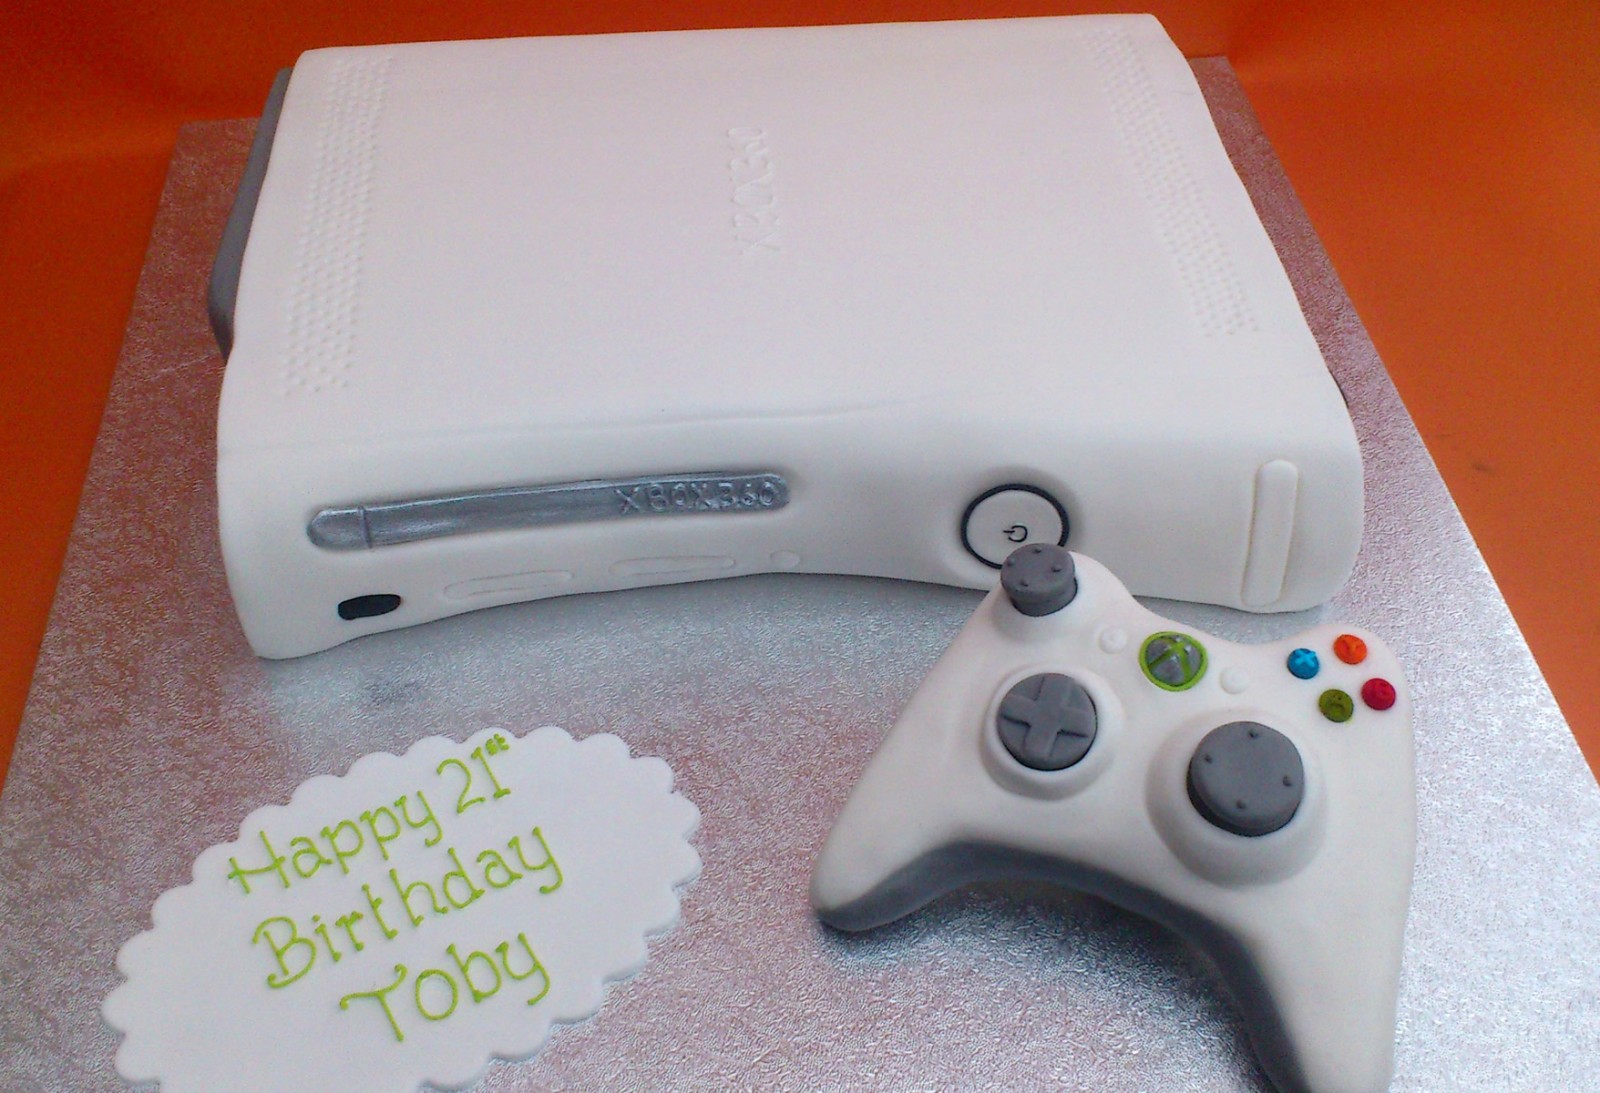 Xbox-360-White-Games-Consol-with-Controller-Sponge-Poole-Dorset-Main-1600x1093.jpg